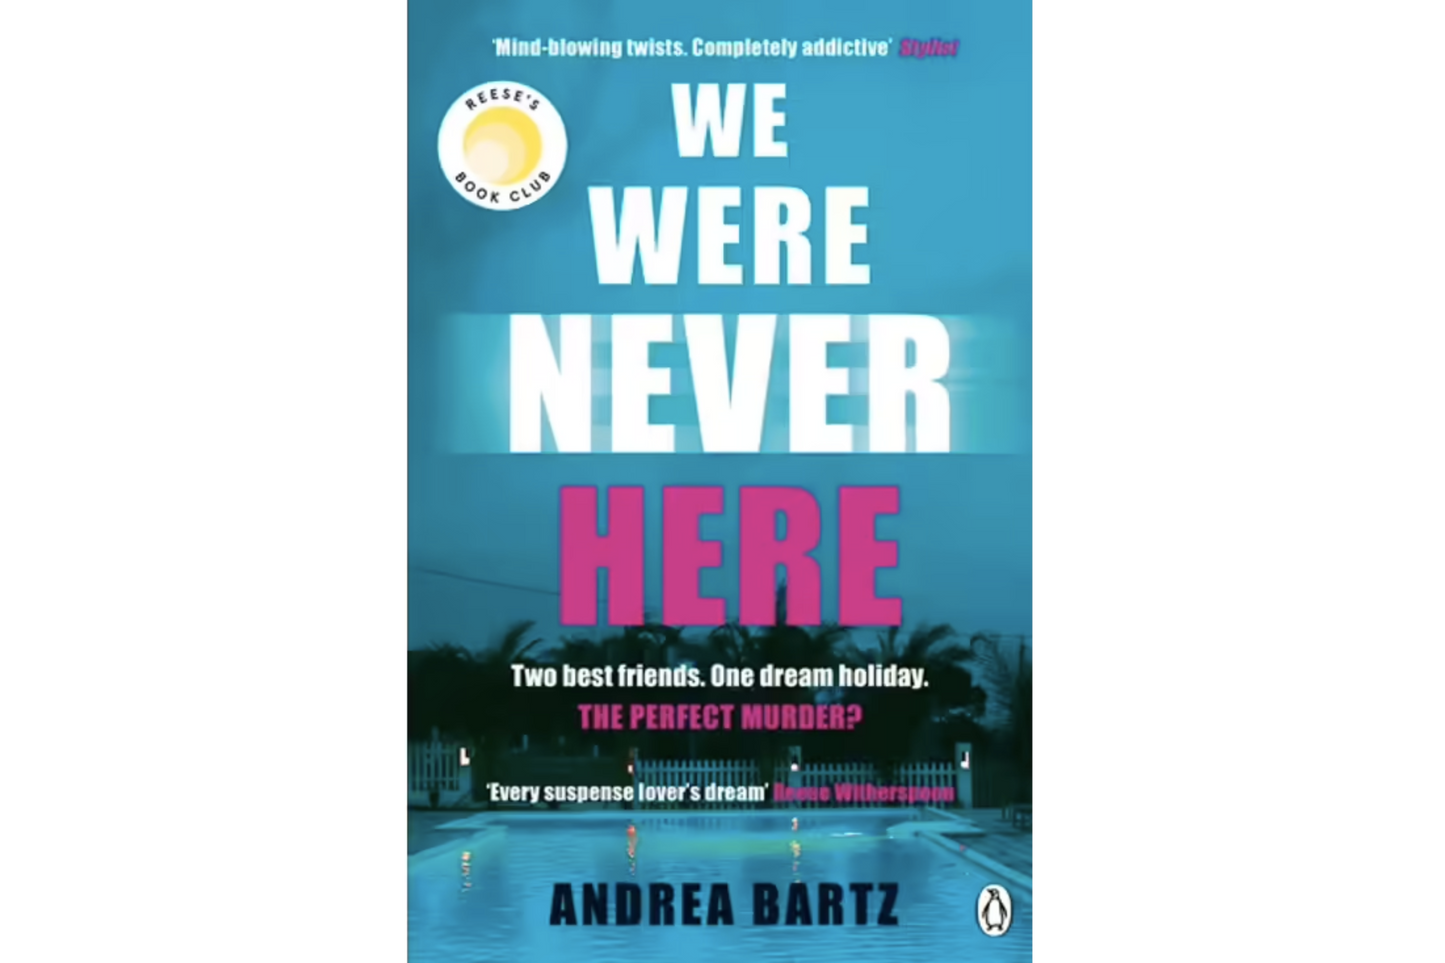 We Were Never Here (Andrea Bartz)